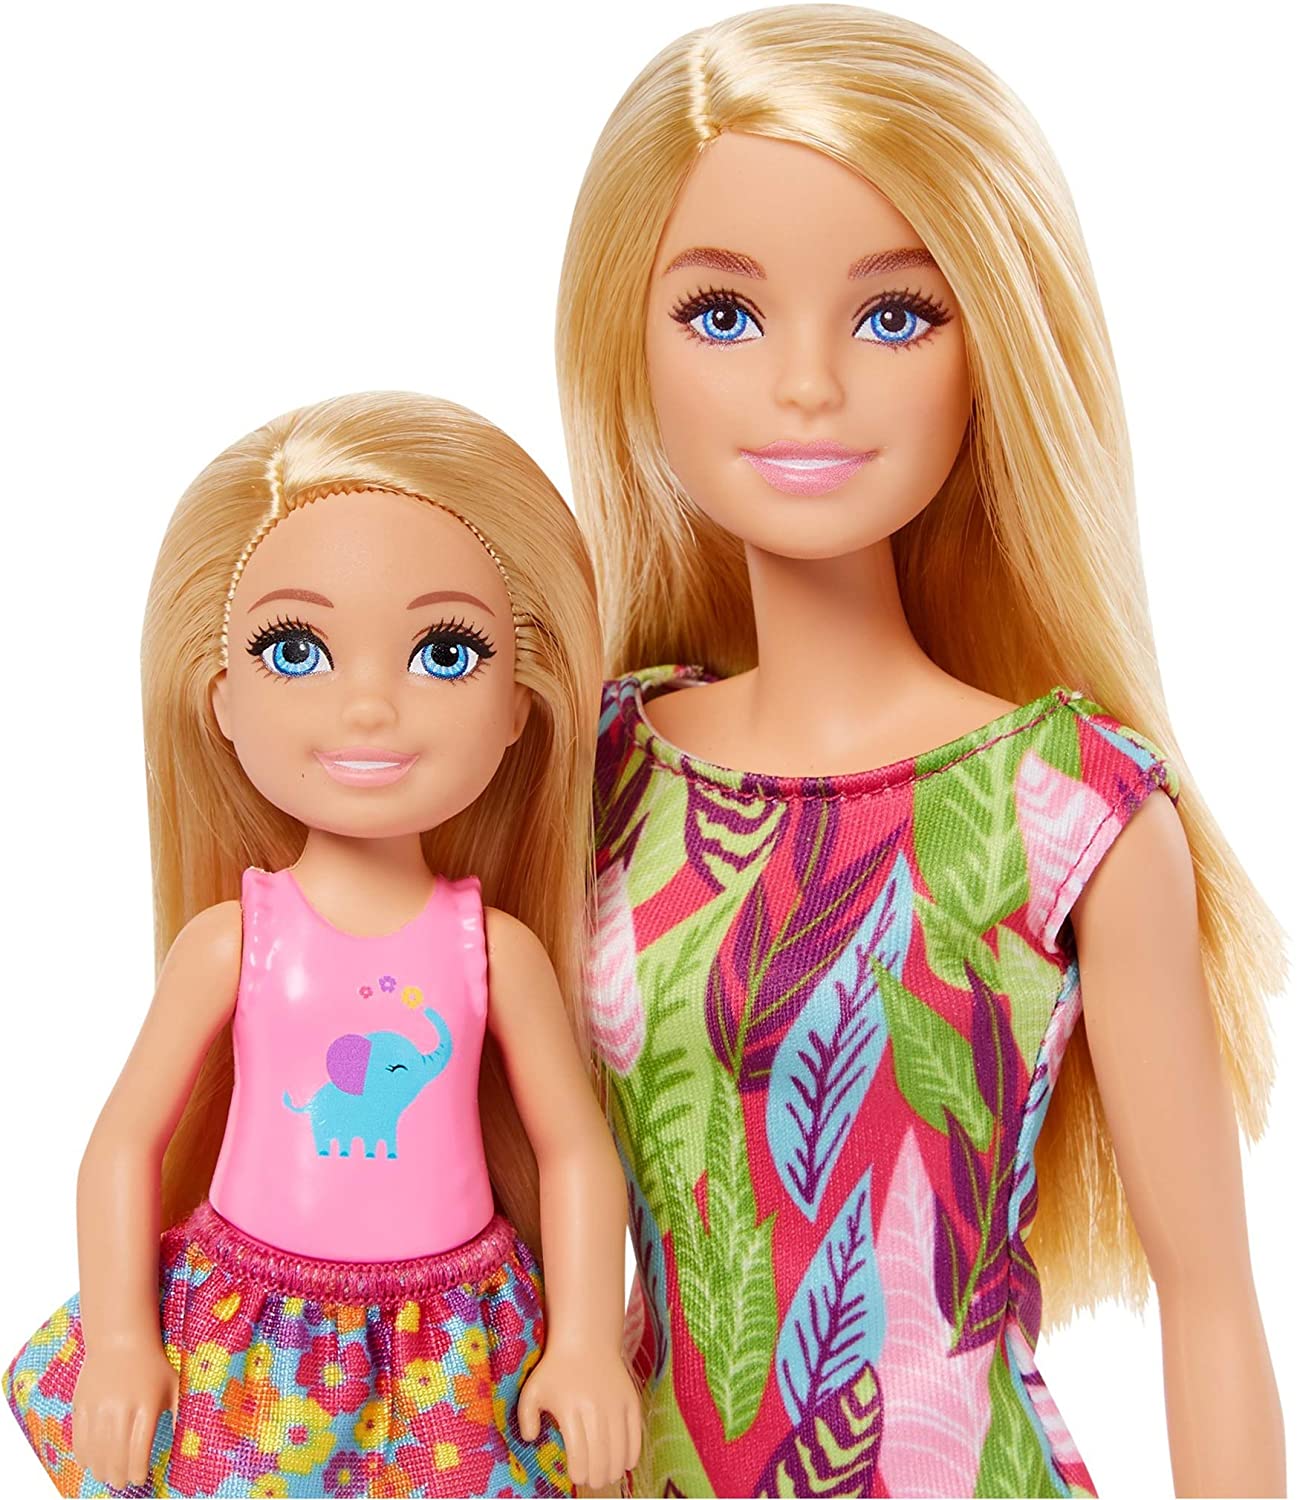 Barbie and Chelsea The Lost Birthday Playset with Barbie & Chelsea Dolls, 3 Pets & Accessories, Gift for 3 to 7 Year Olds, Toys & Games